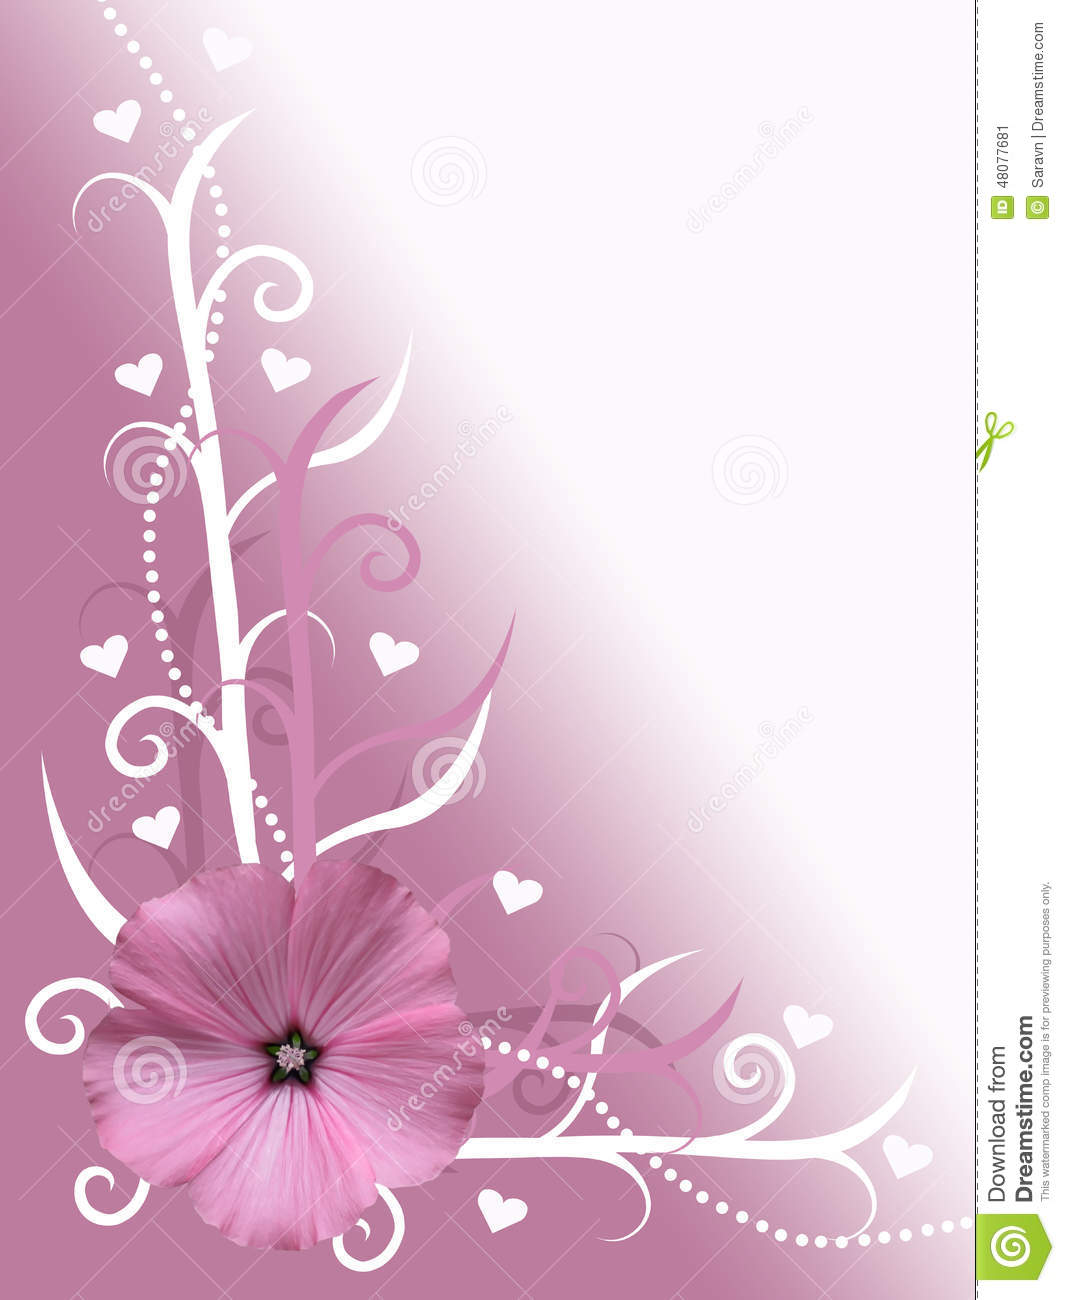 Pink and White Flower Design